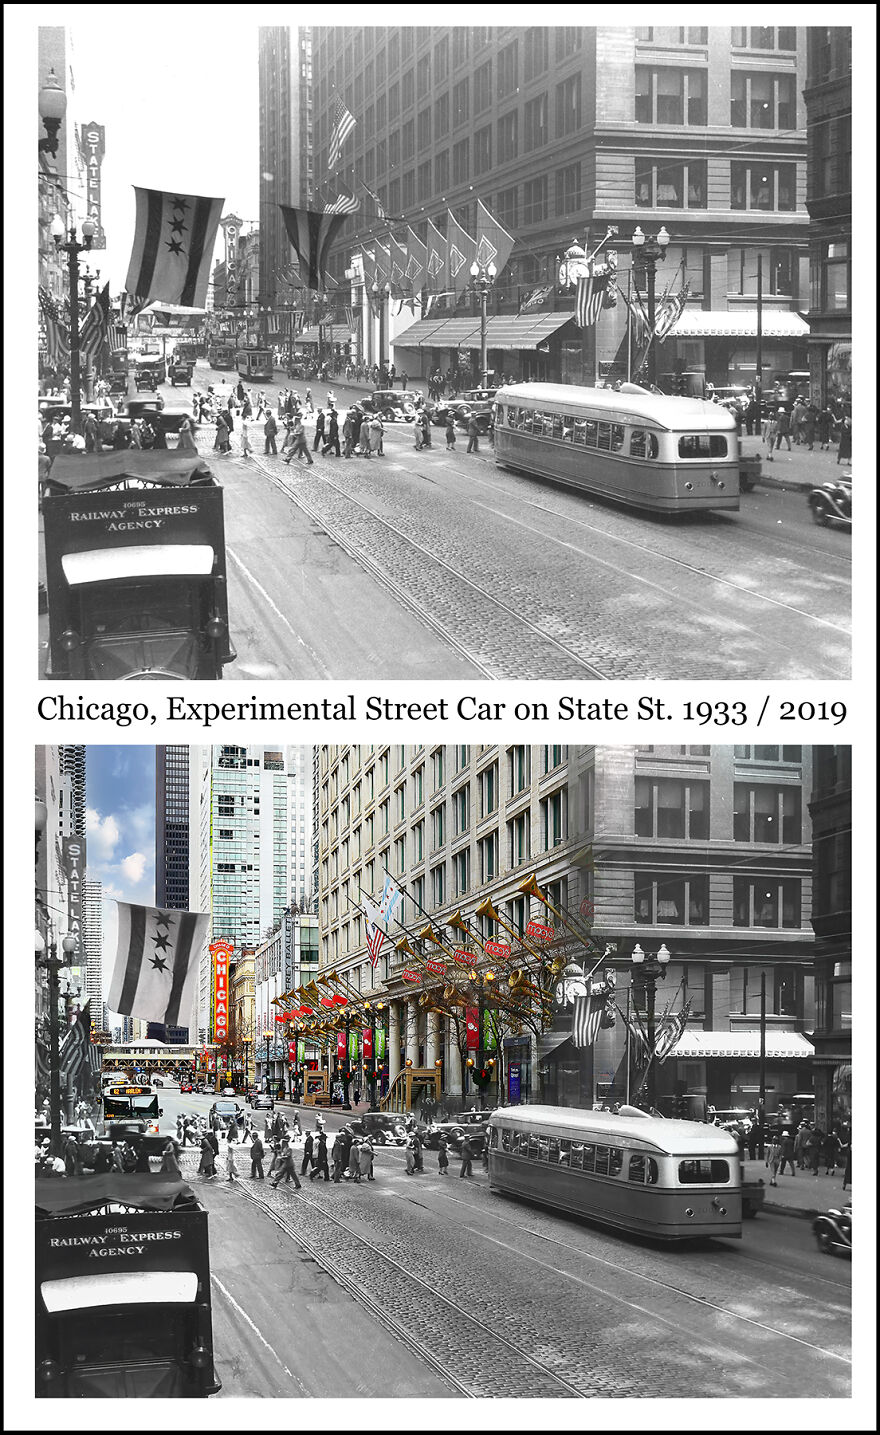 Chicago, Experimental Streetcar On State Street 1933 / 2019